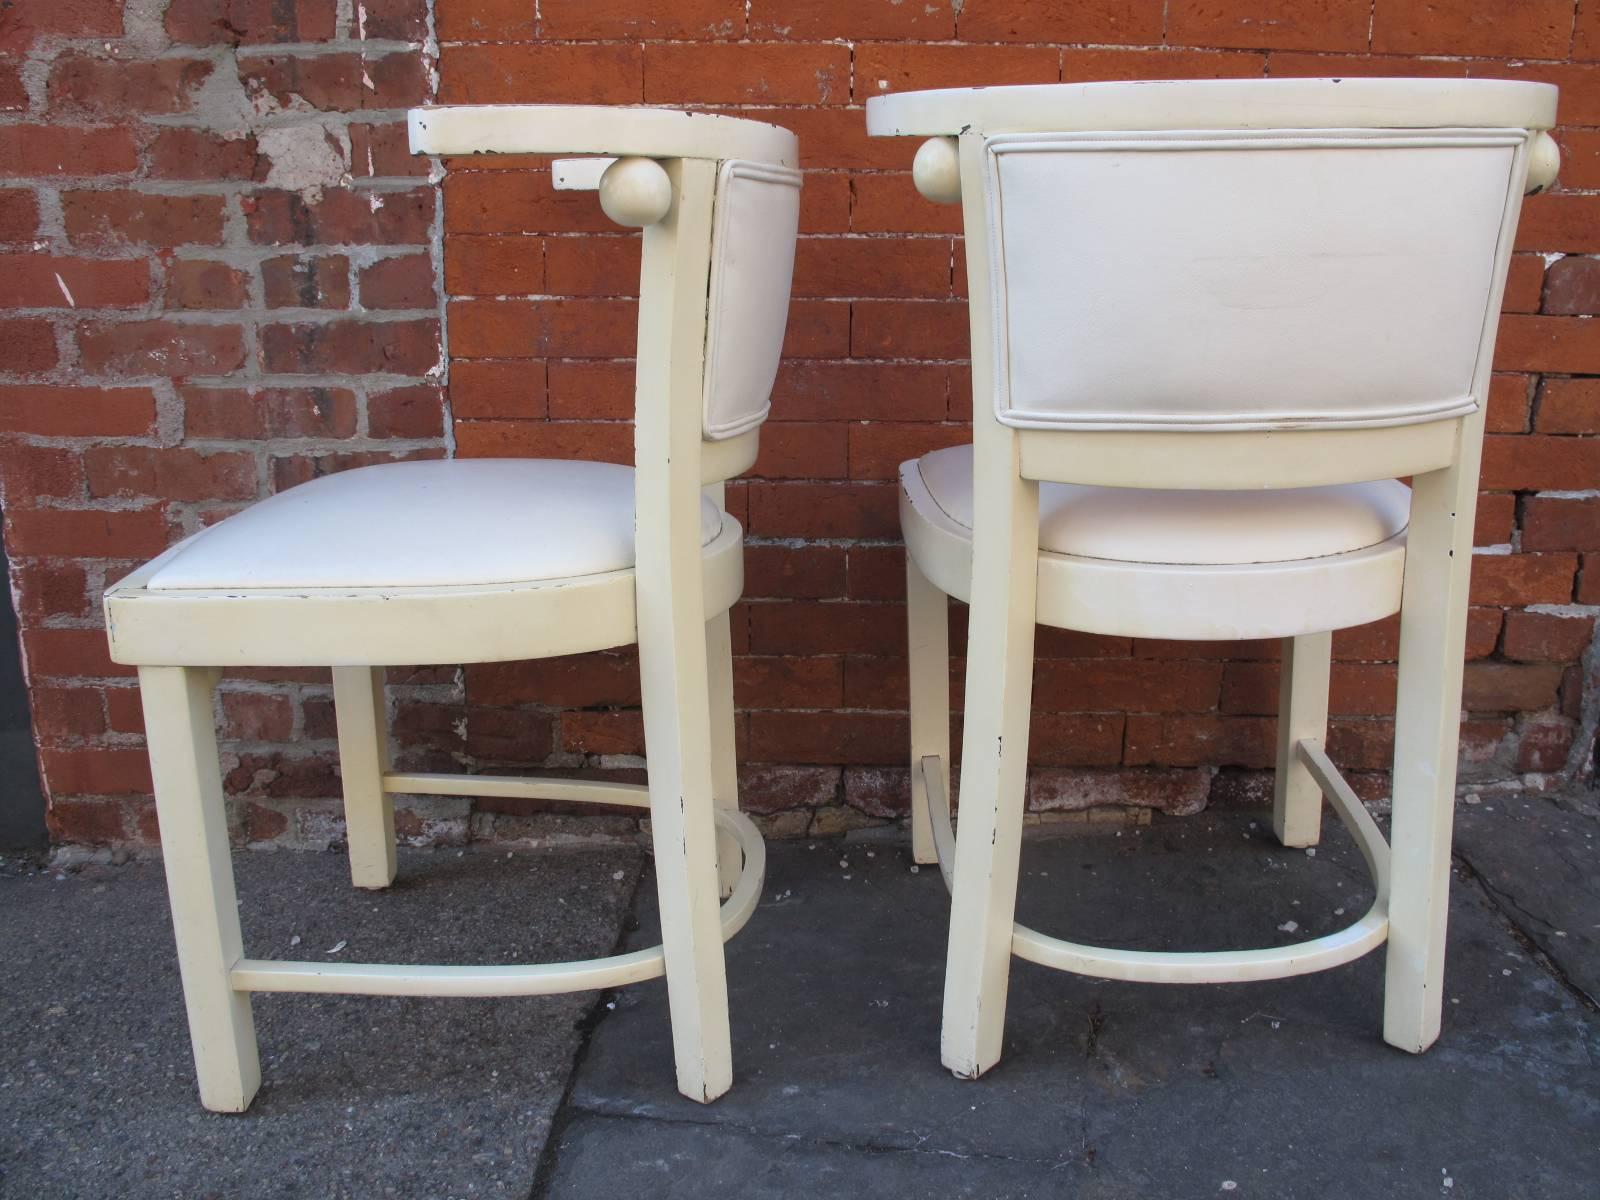 Two side chairs in white lacquer in the manner of Josef Hoffmann. Seats and back appear to have been replaced and reupholstered in white vinyl. No label or makers mark.